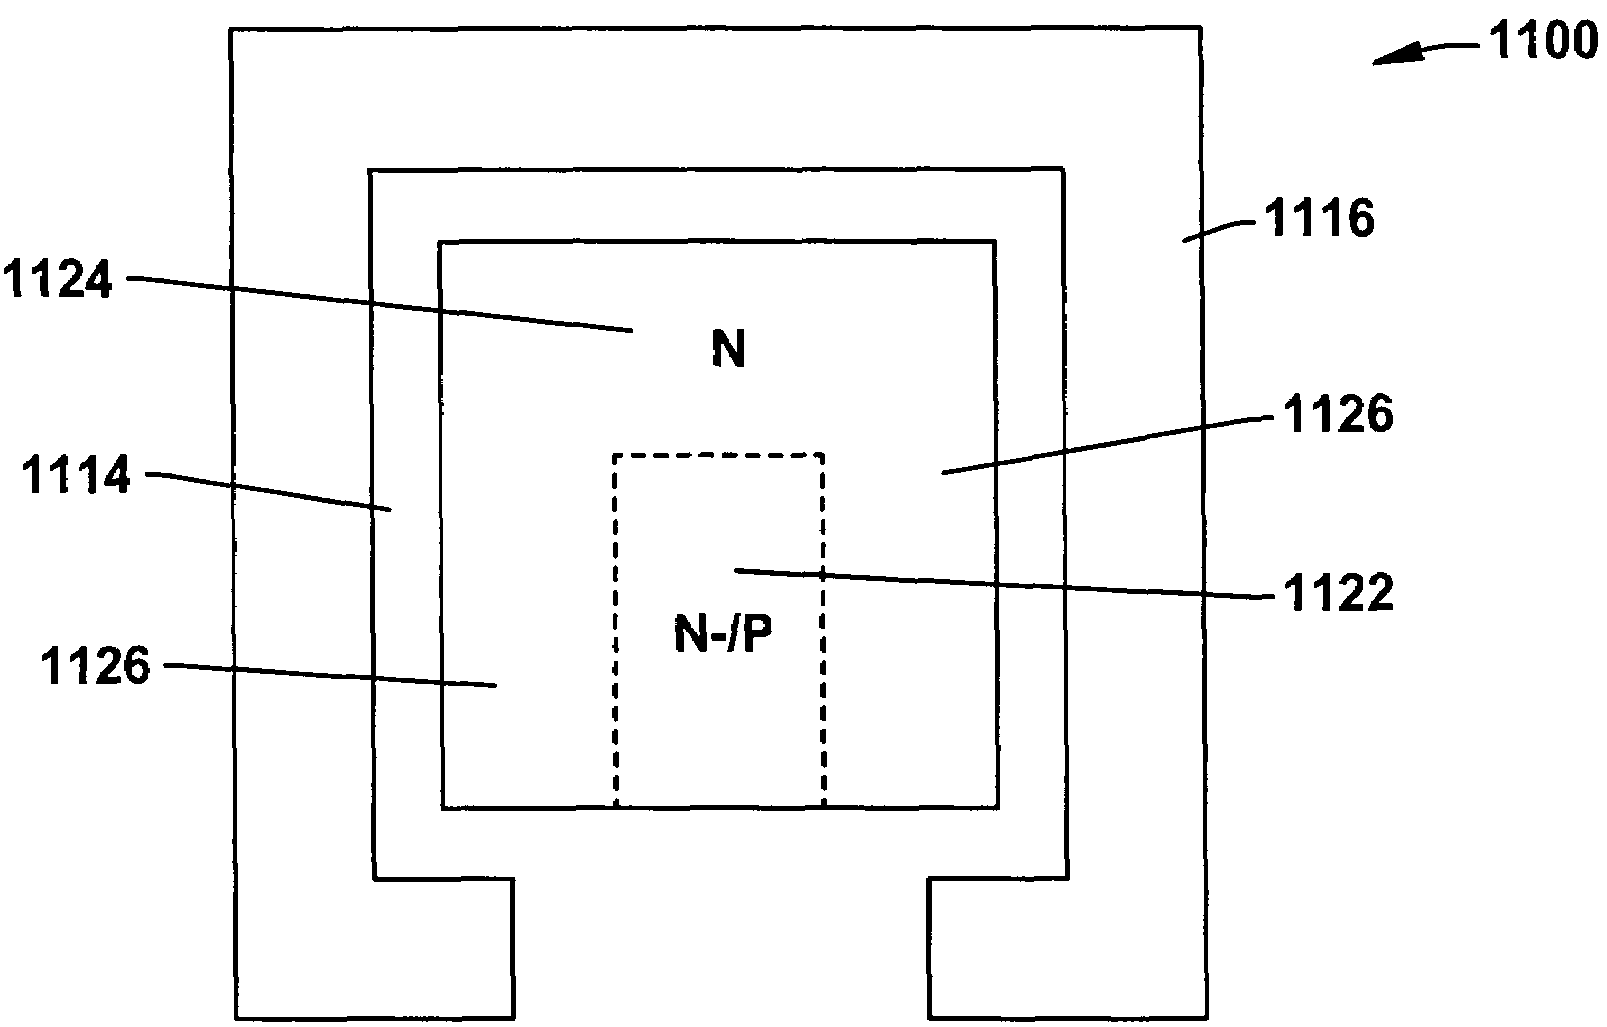 Short channel semiconductor device fabrication